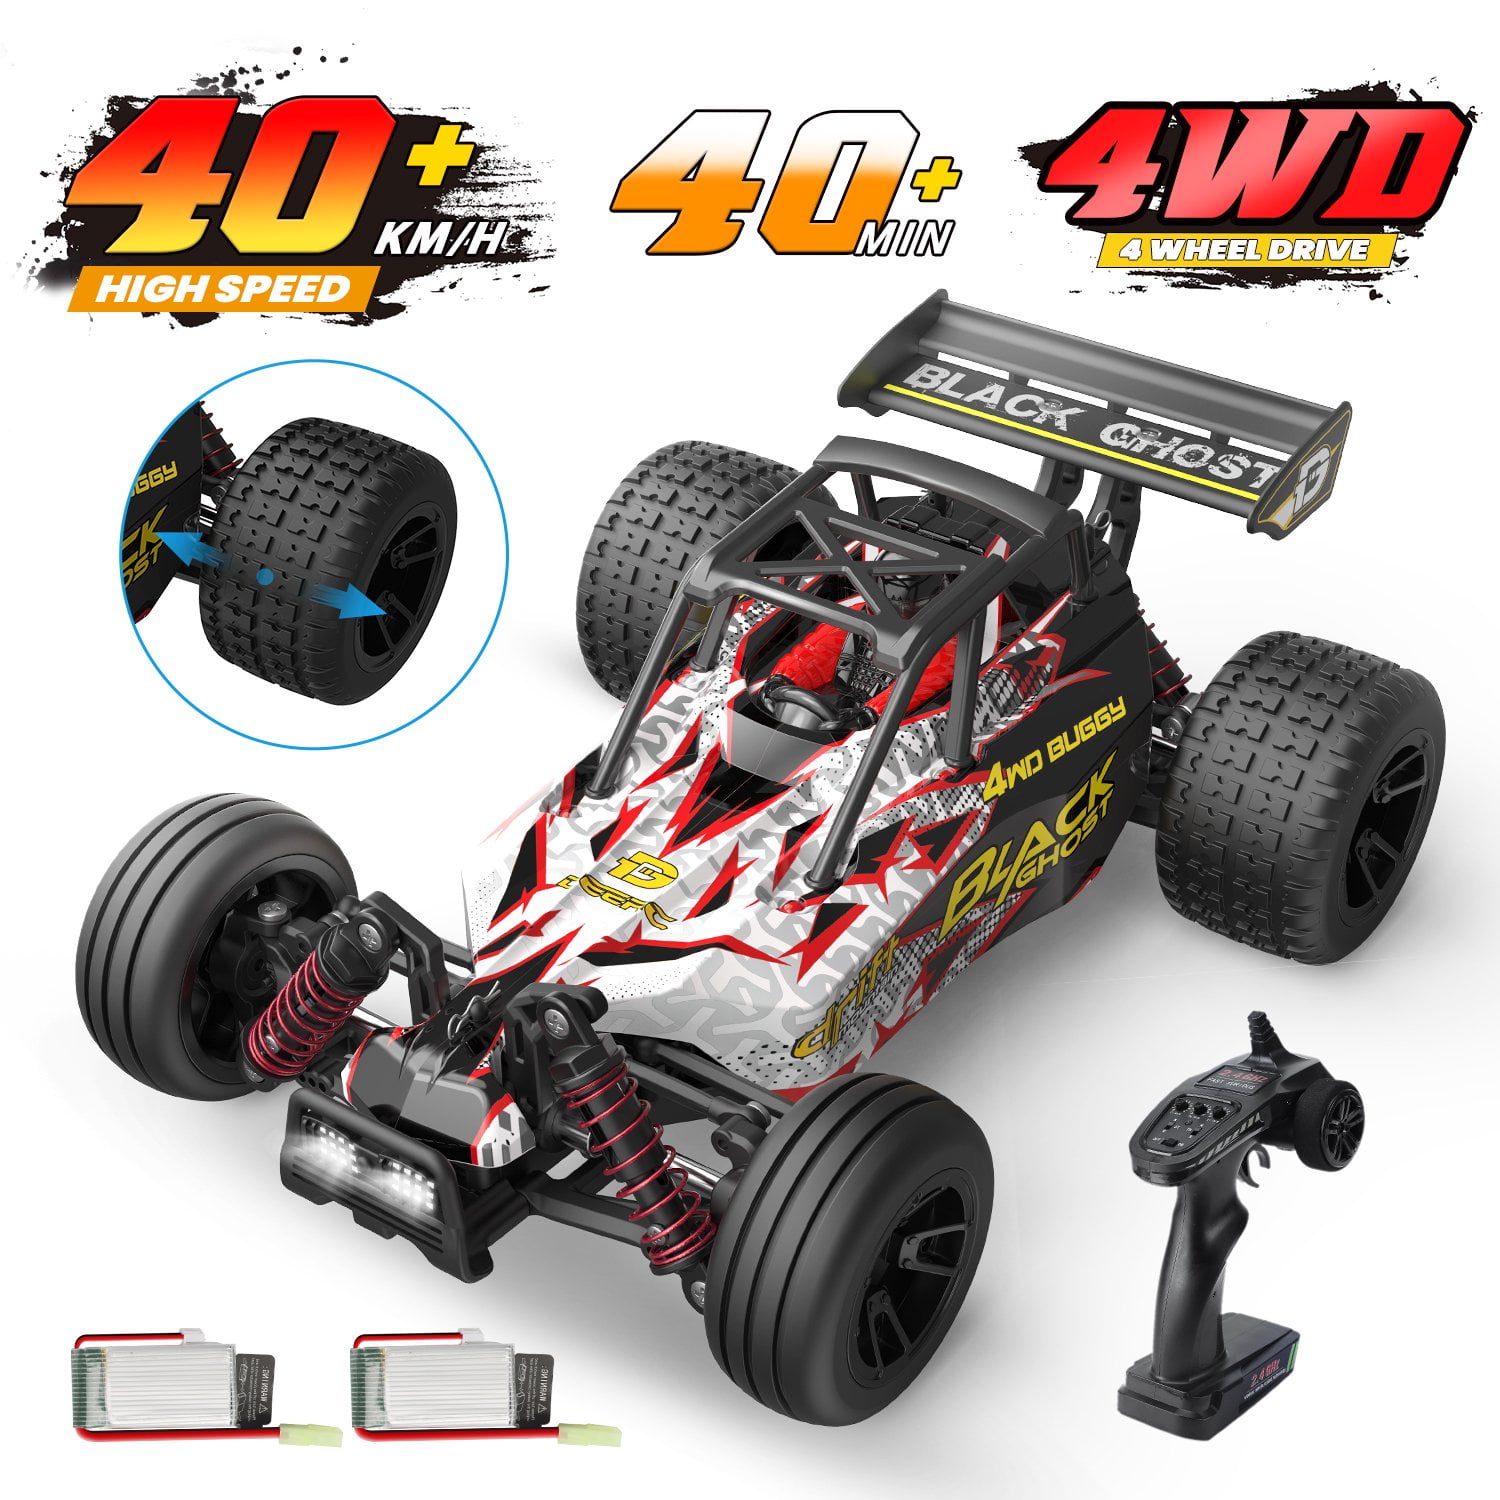 1:18 2.4GHz Fast Speed Four Wheel Drive Remote Control RC Car Model Toy Gift 